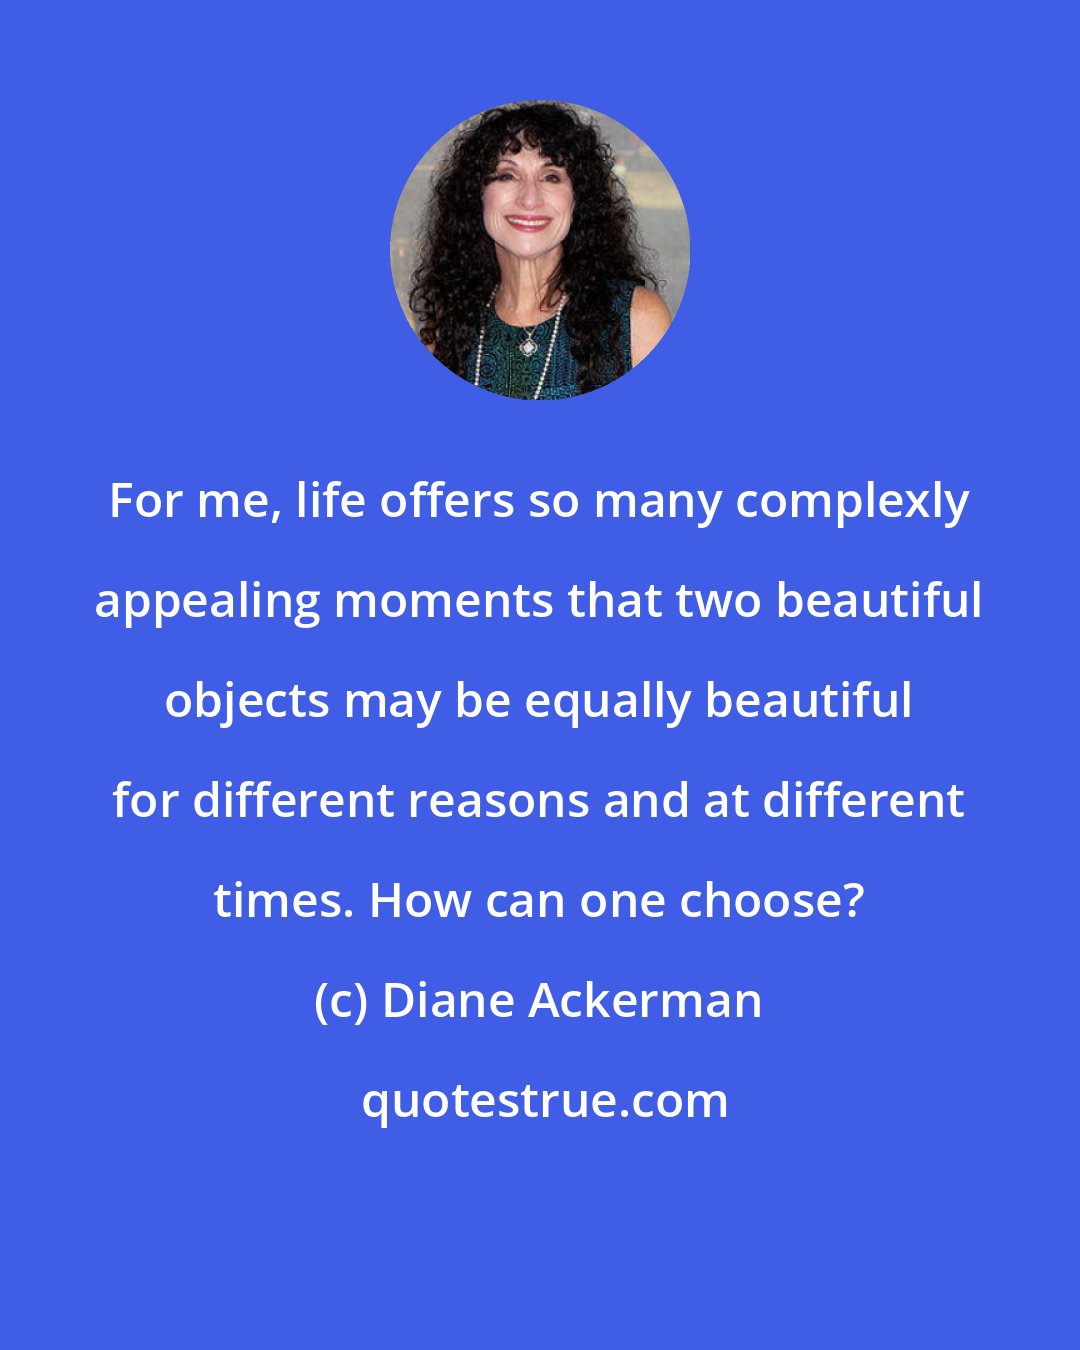 Diane Ackerman: For me, life offers so many complexly appealing moments that two beautiful objects may be equally beautiful for different reasons and at different times. How can one choose?